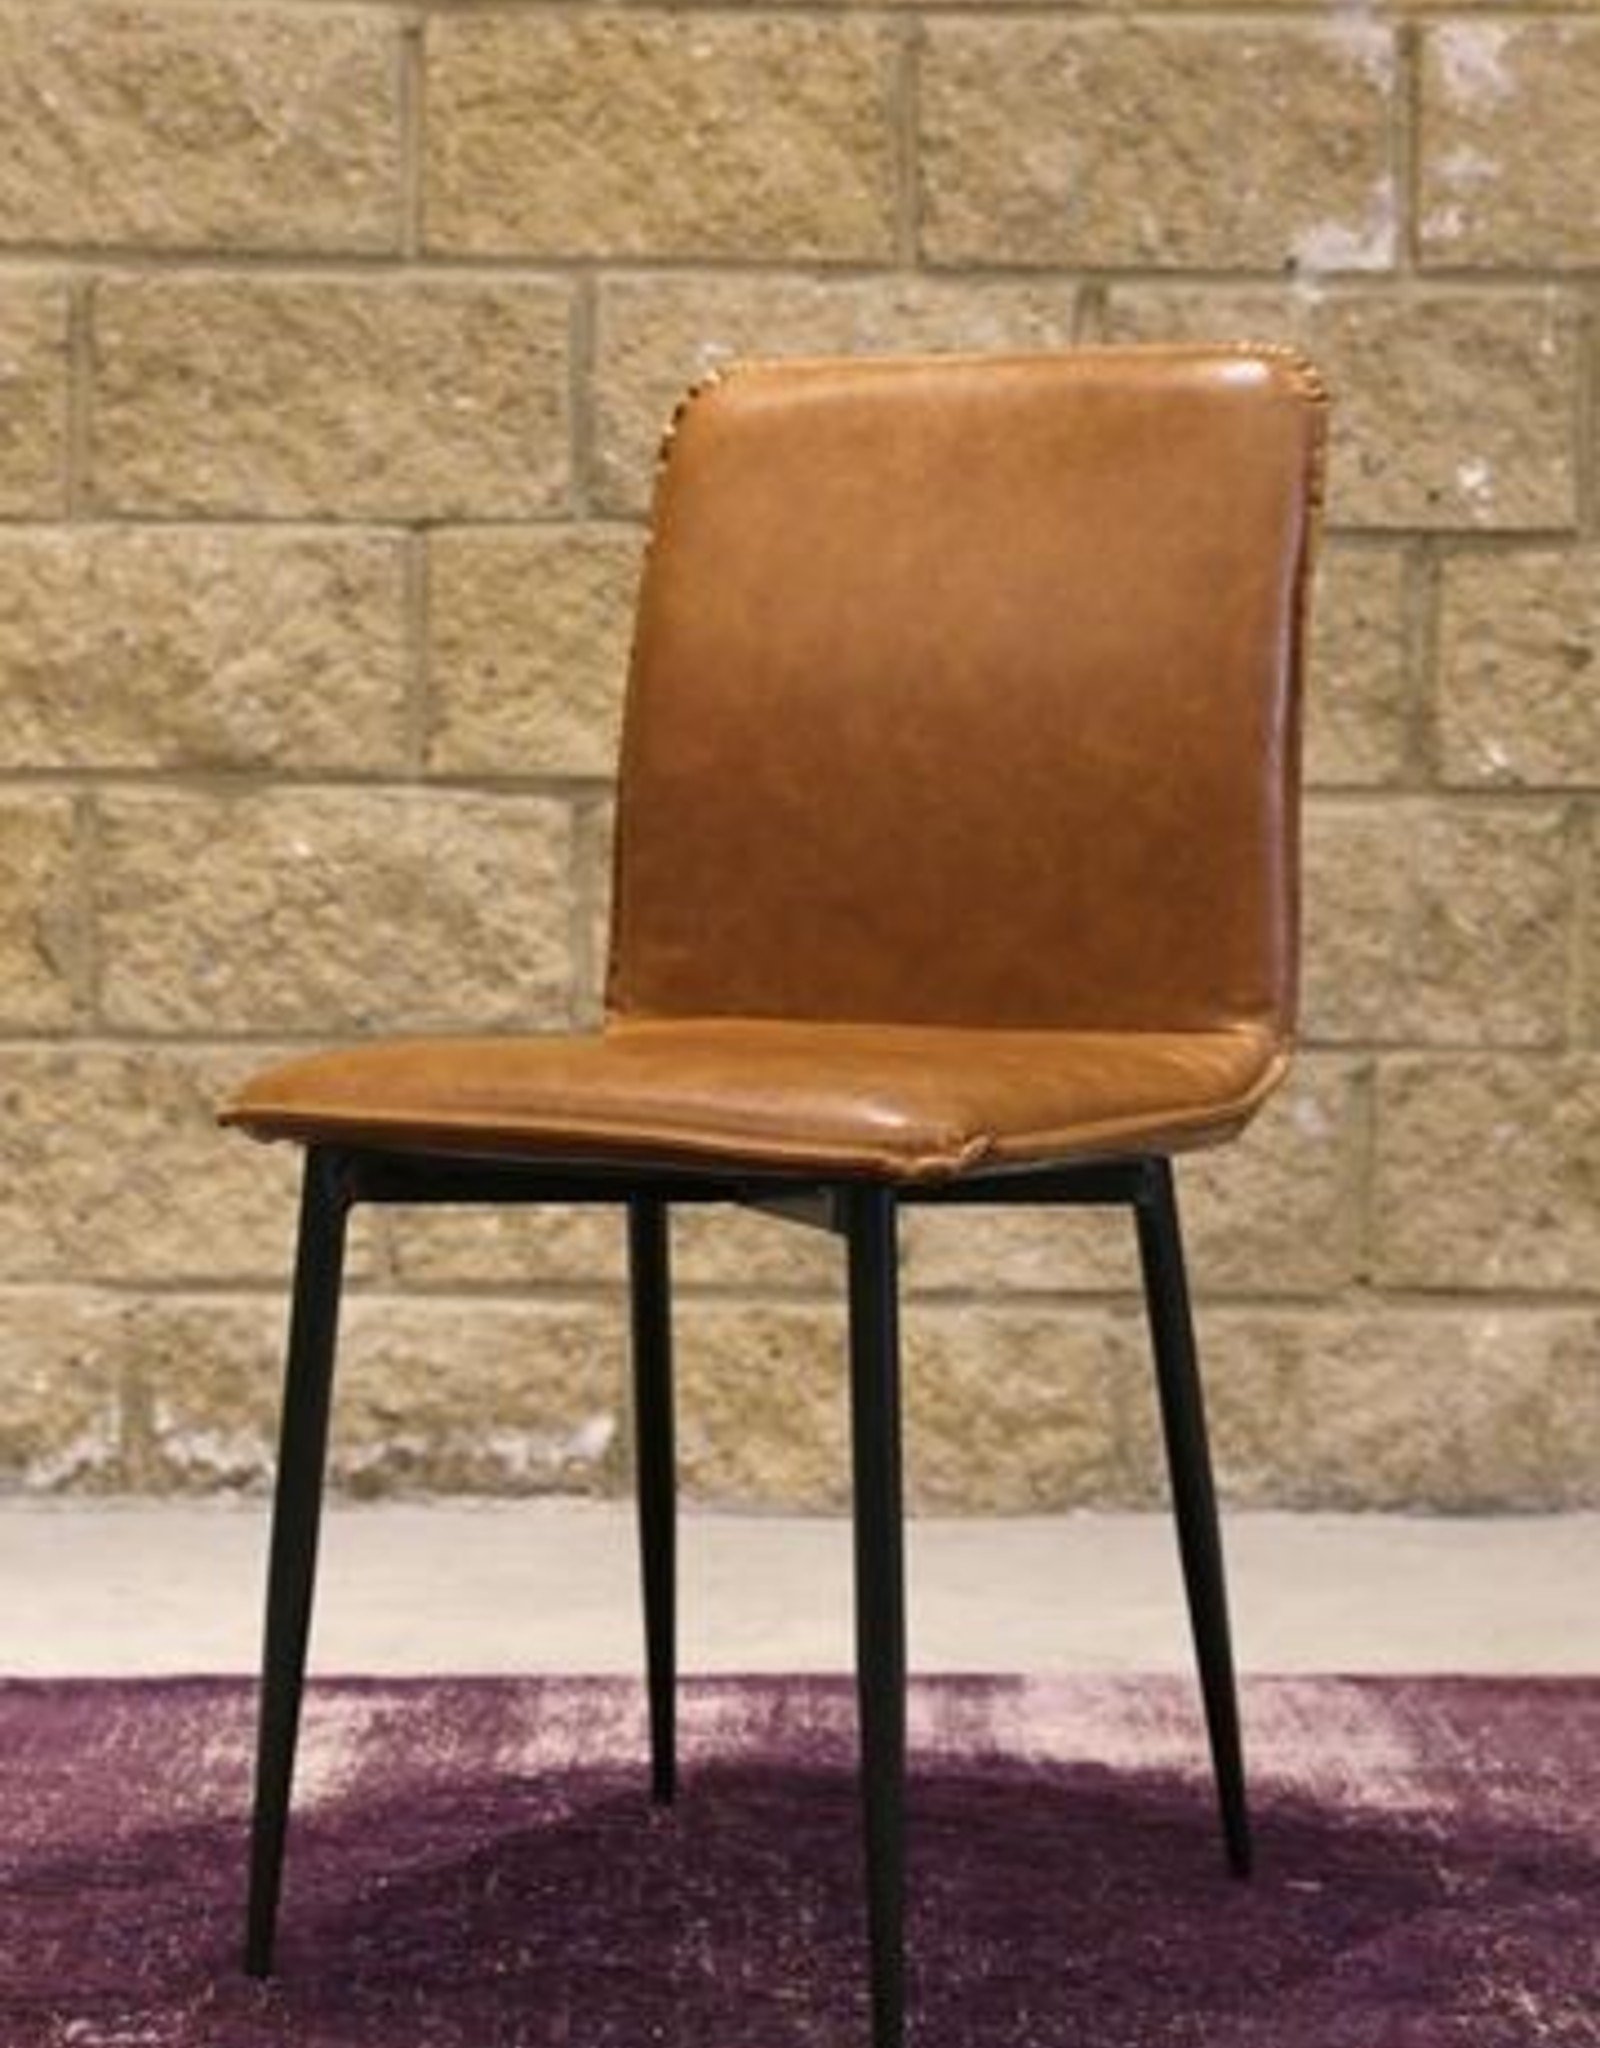 LH Imports LH Luca Dining Side Chair Tan Brown CR001-TB